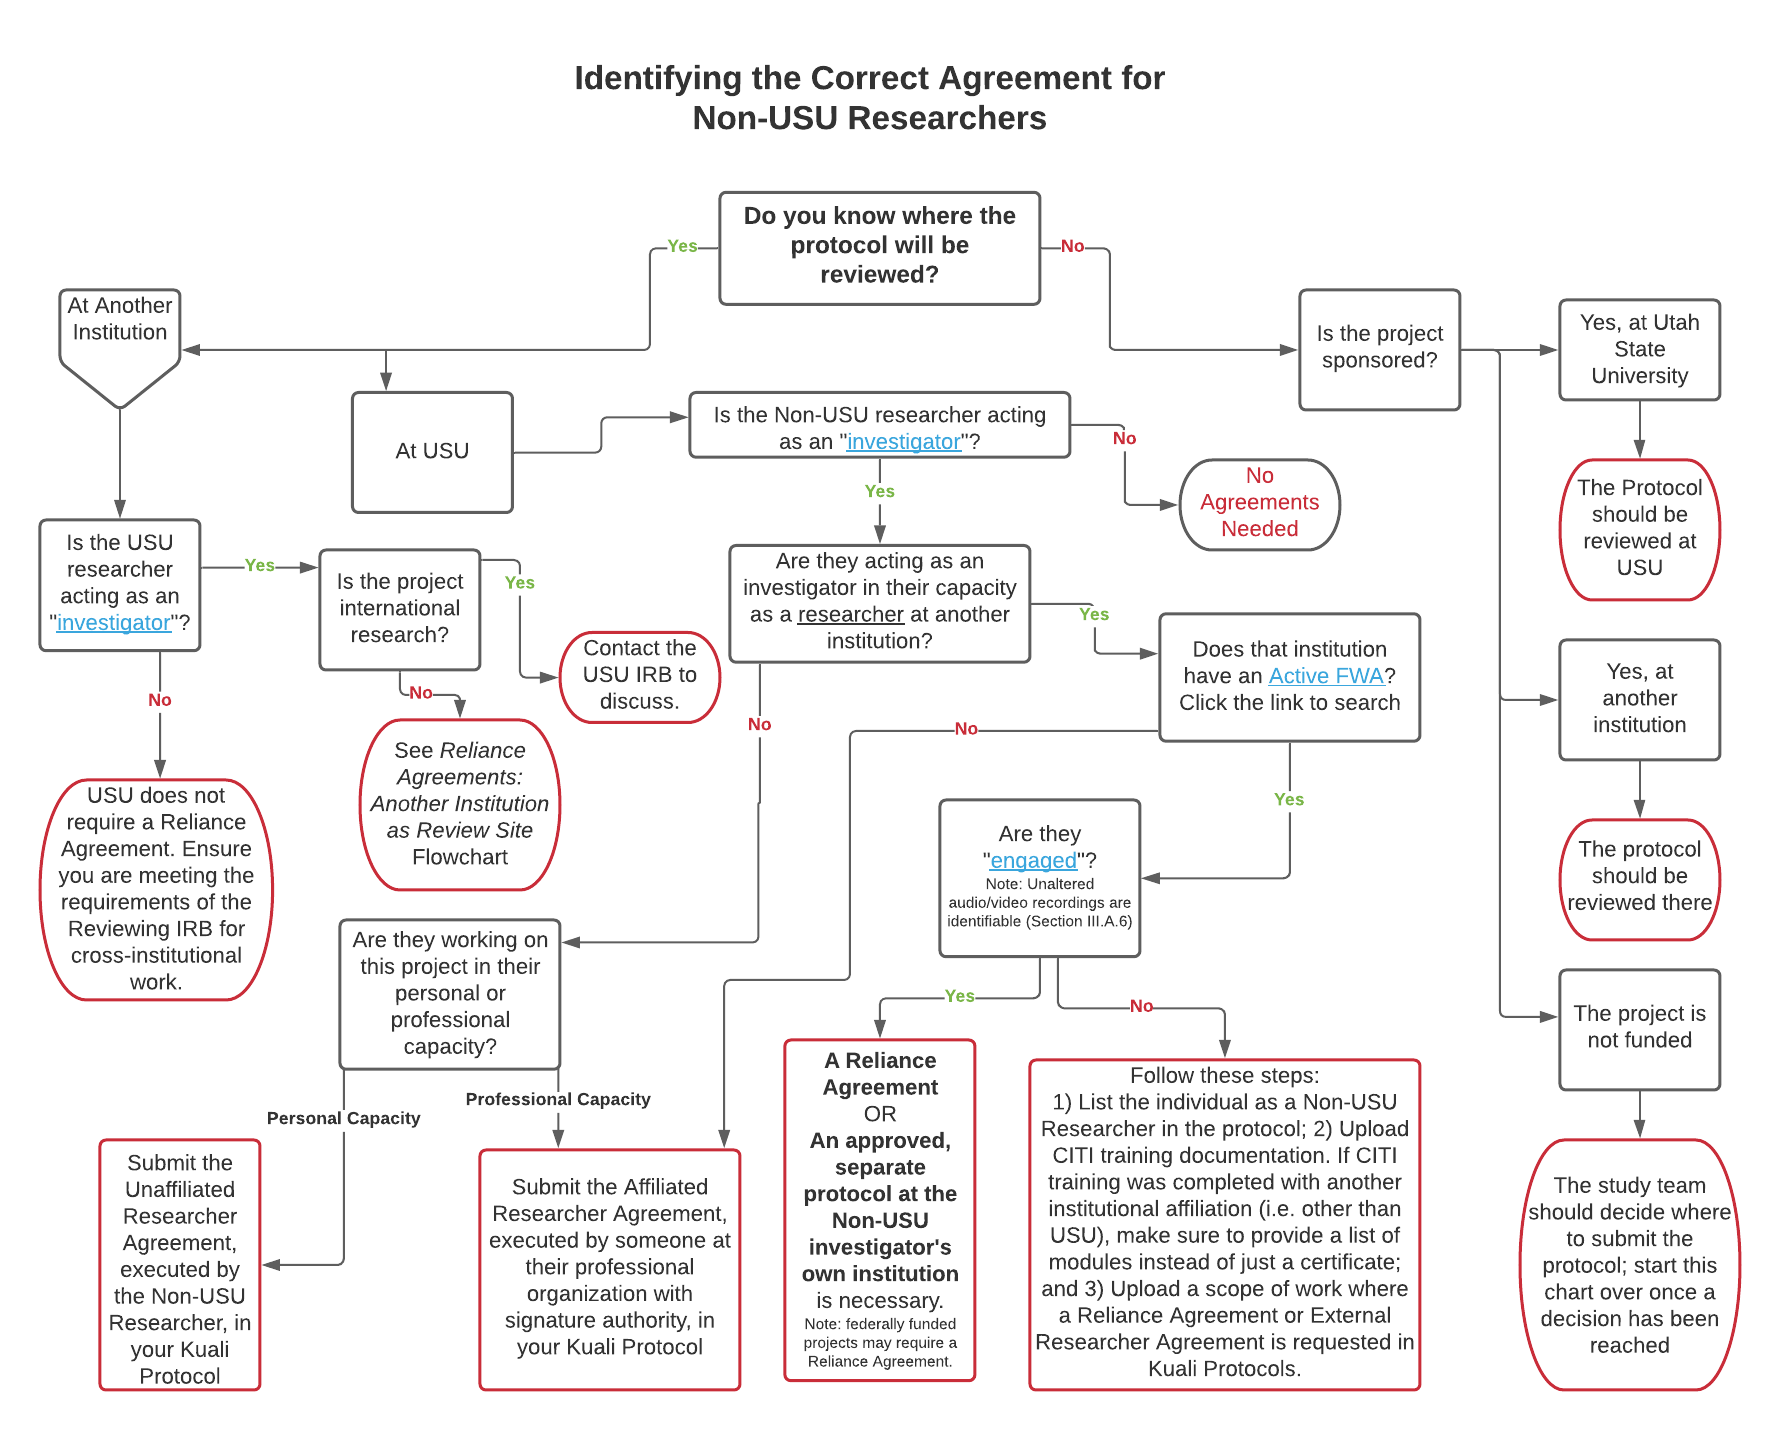 Identifying the Correct Agreement for Non-USU Researchers flow chart: please call 435-797-1821 to get alternative access to the image content